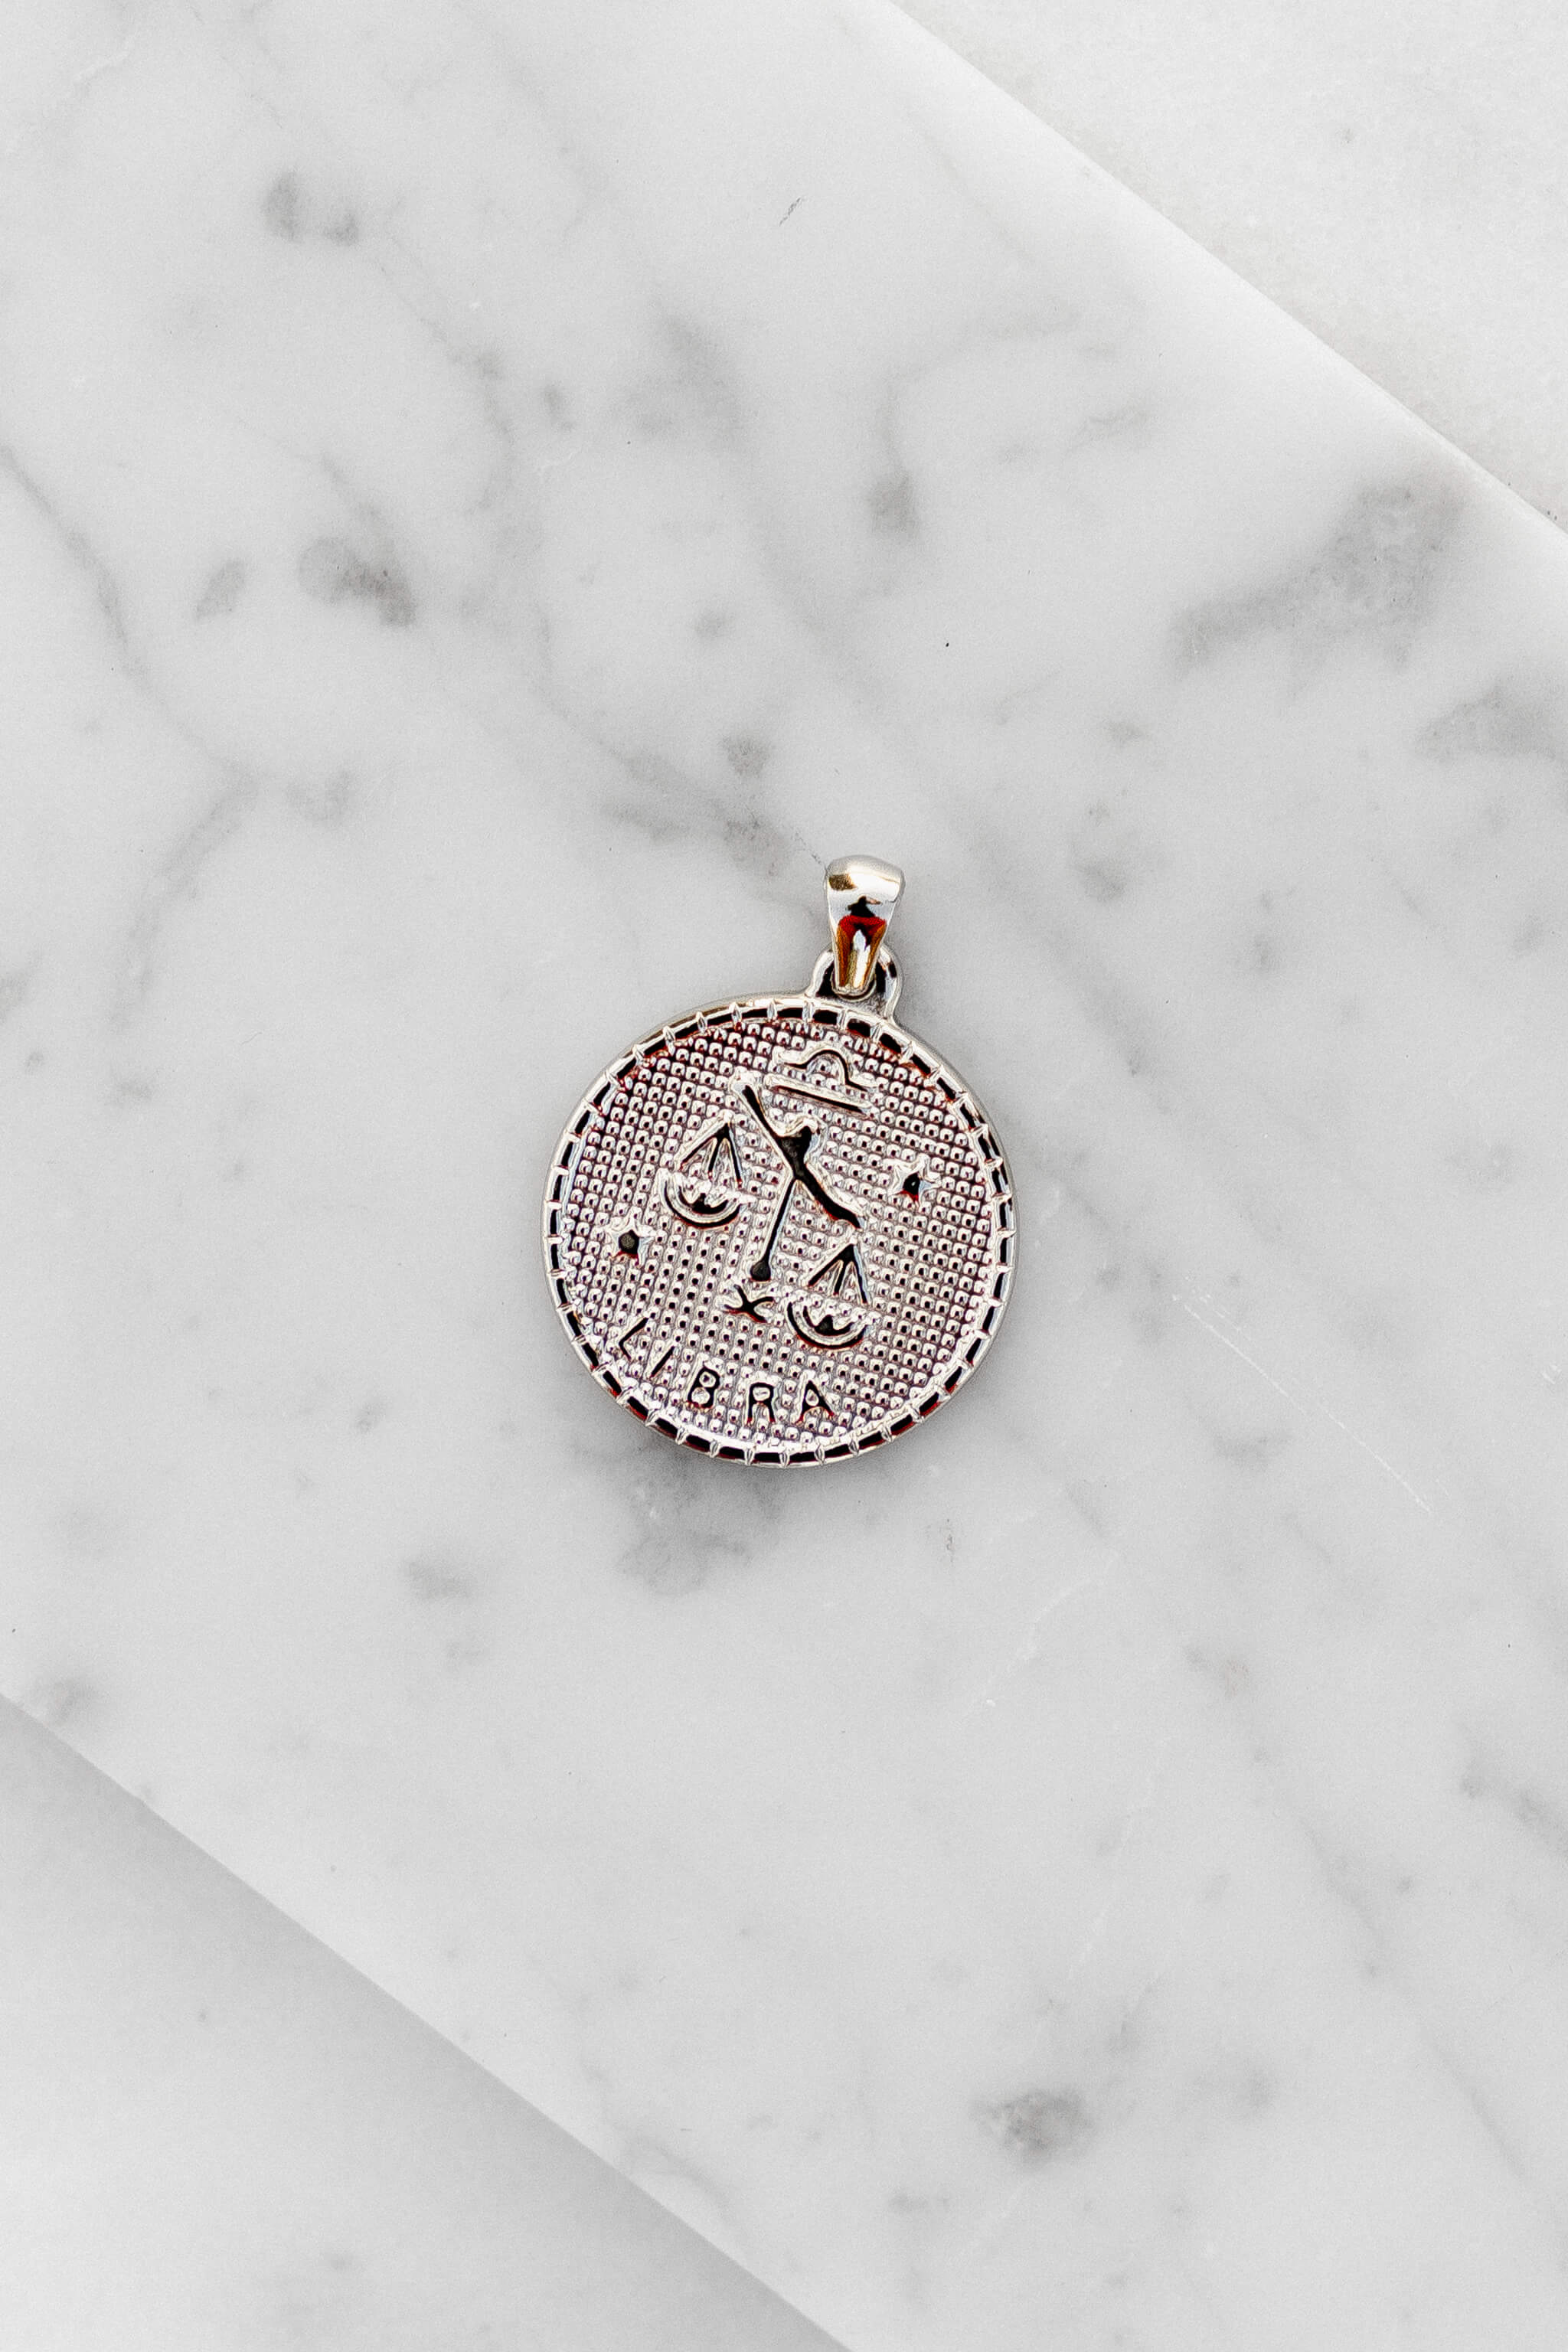 Libra zodiac sign silver coin charm laying on a white marble